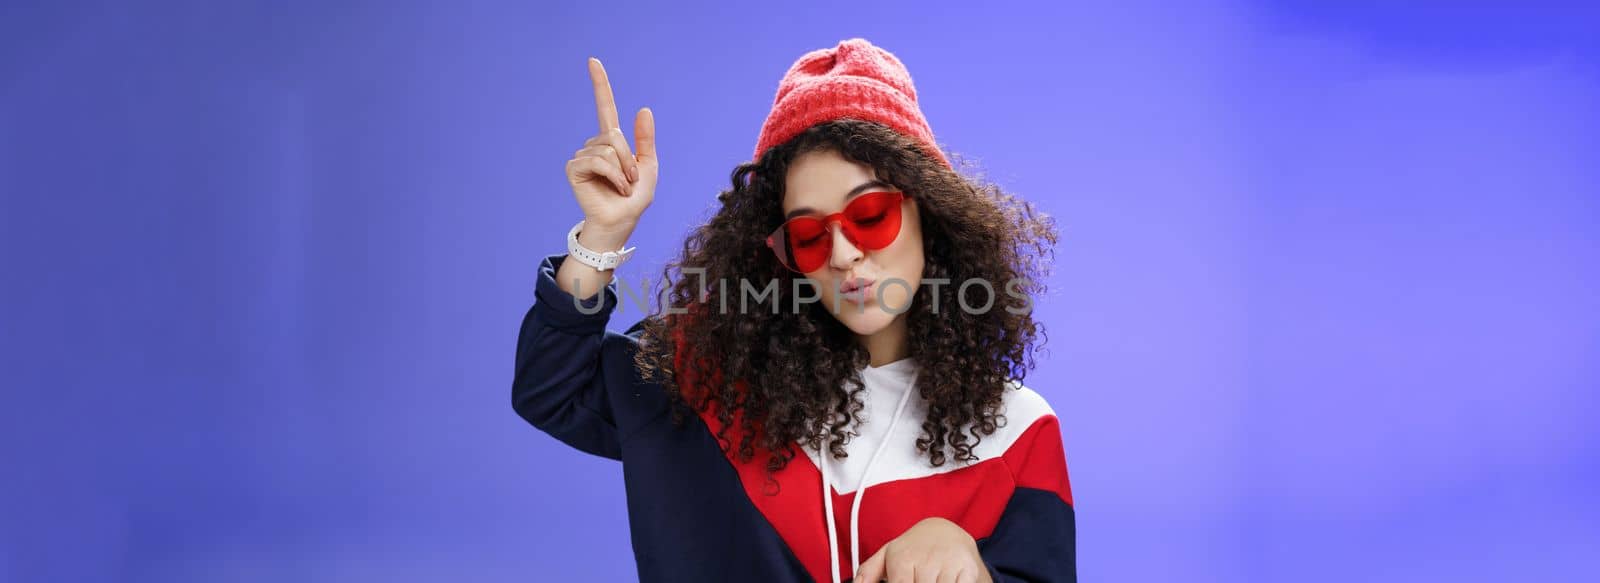 Lifestyle. Cute party girl having fun making disco movements folding lips as enjoying cool song dancing joyfully wearing stylish red sunglasses and warm hat looking down enjoying music at party over blue wall.